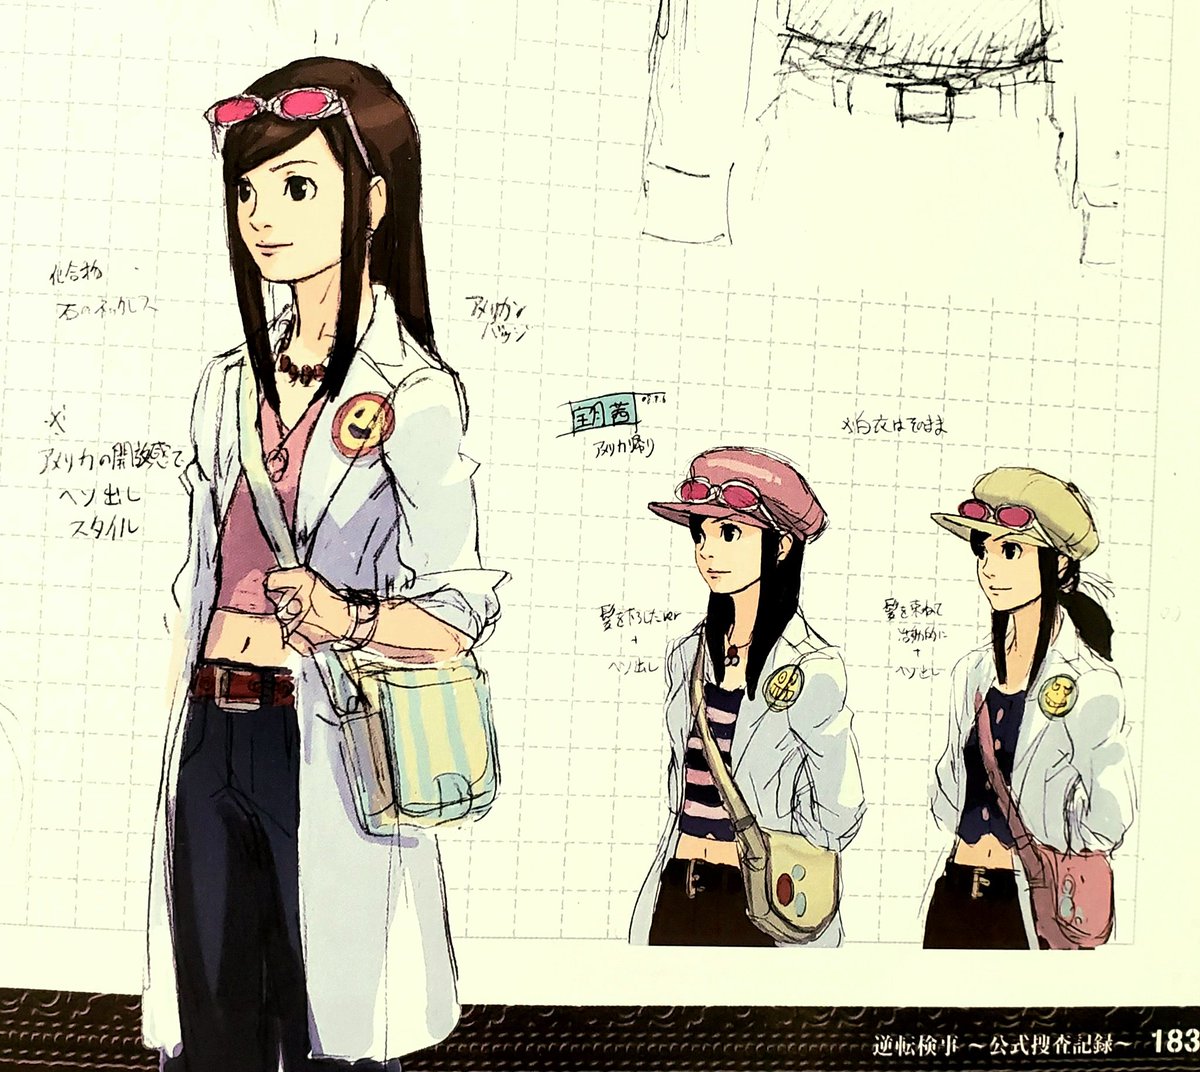 Investigations official art and Ema Skye concept art